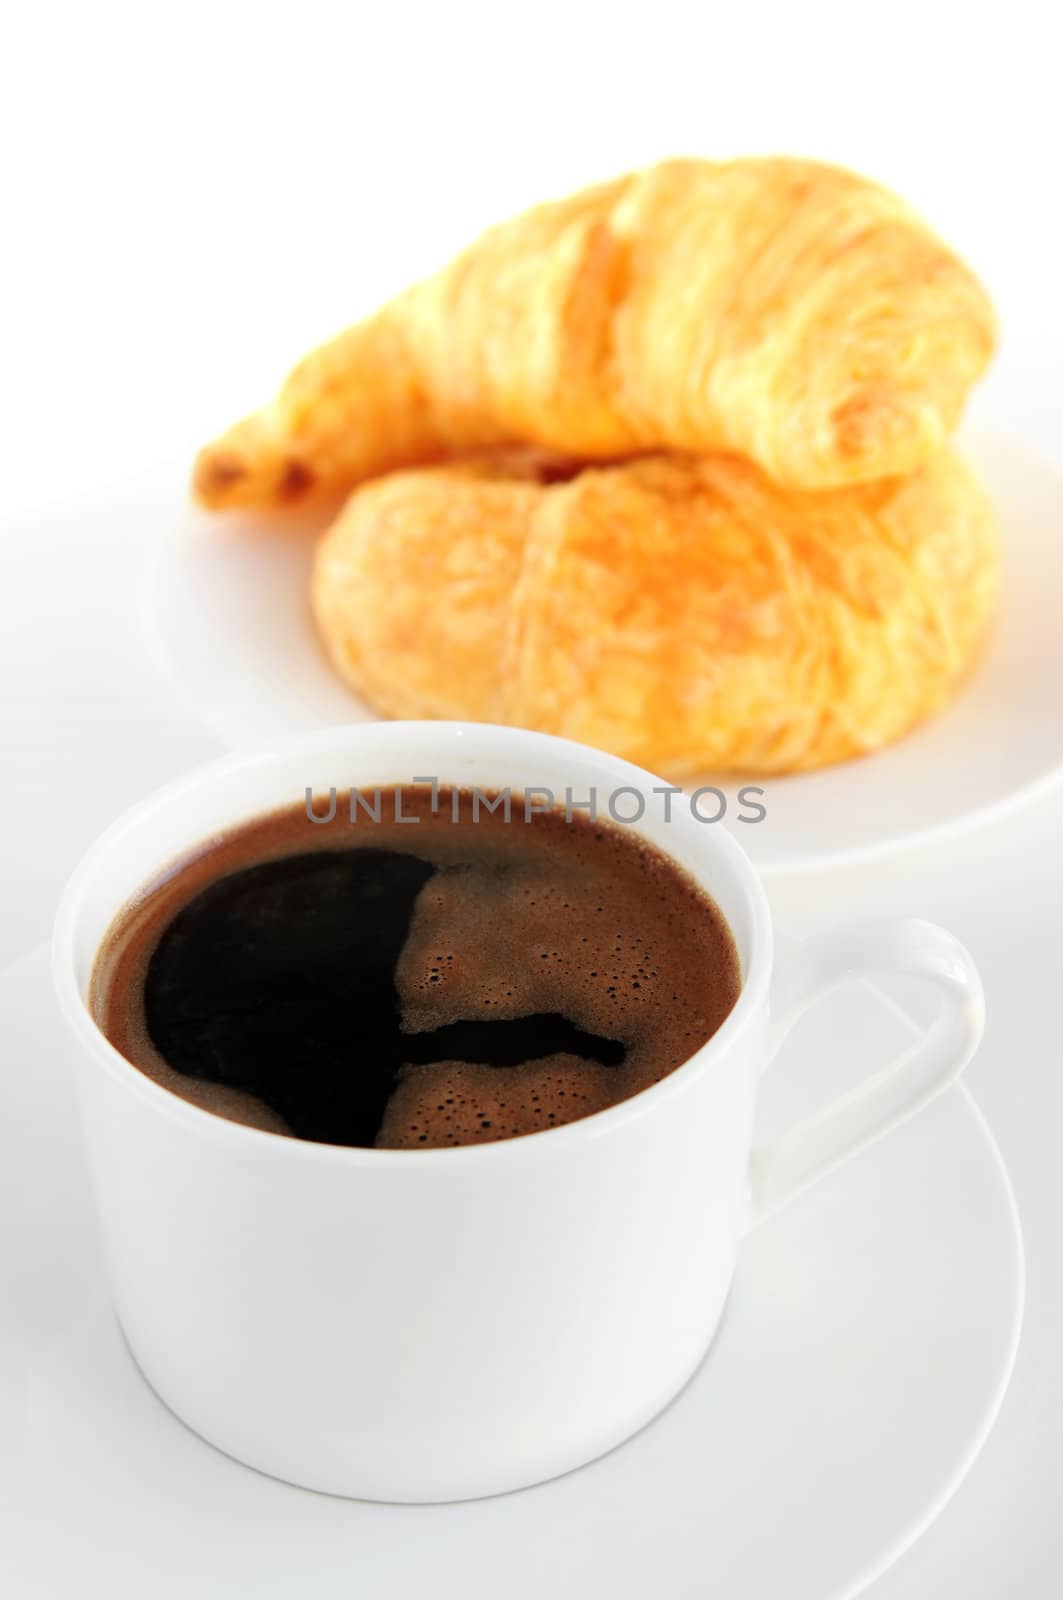 Breaksfast of black coffee and fresh croissants